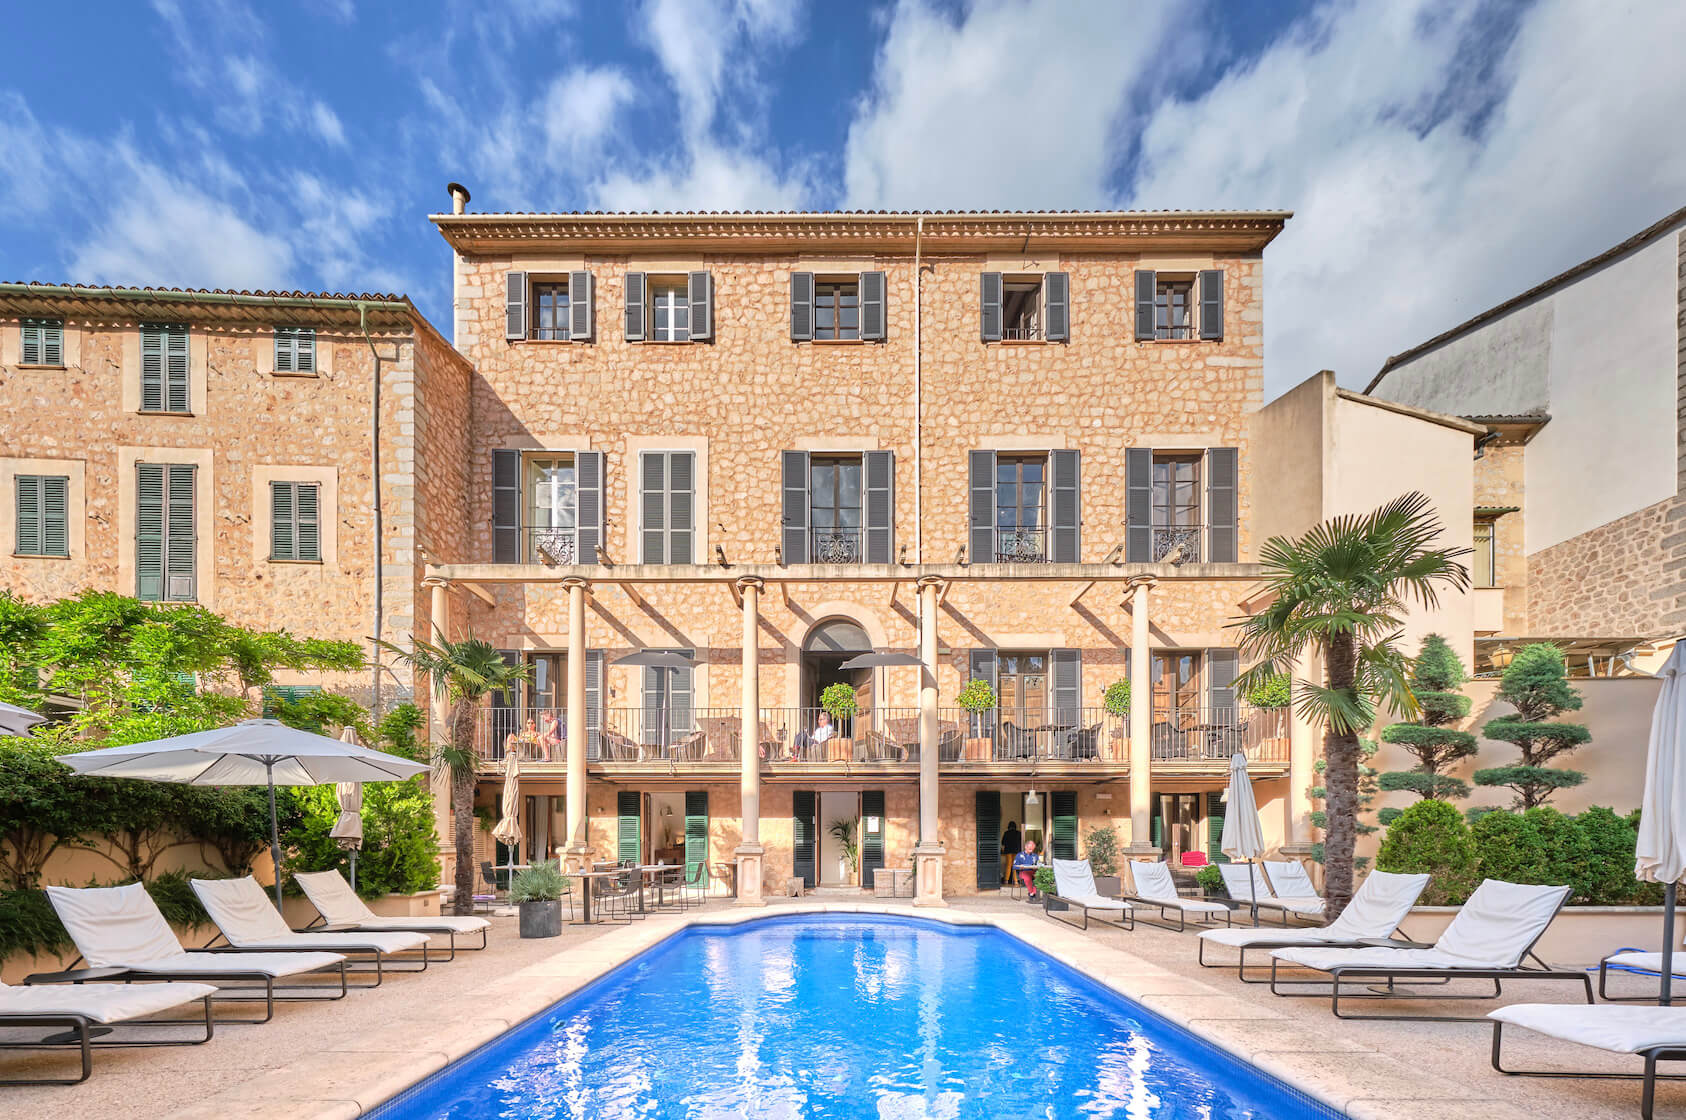 LUXURIA LIFESTYLE INTERNATIONAL WELCOMES L’AVENIDA – A UNIQUE ADULTS ONLY LUXURY HOTEL ON MAJORCA, SPAIN